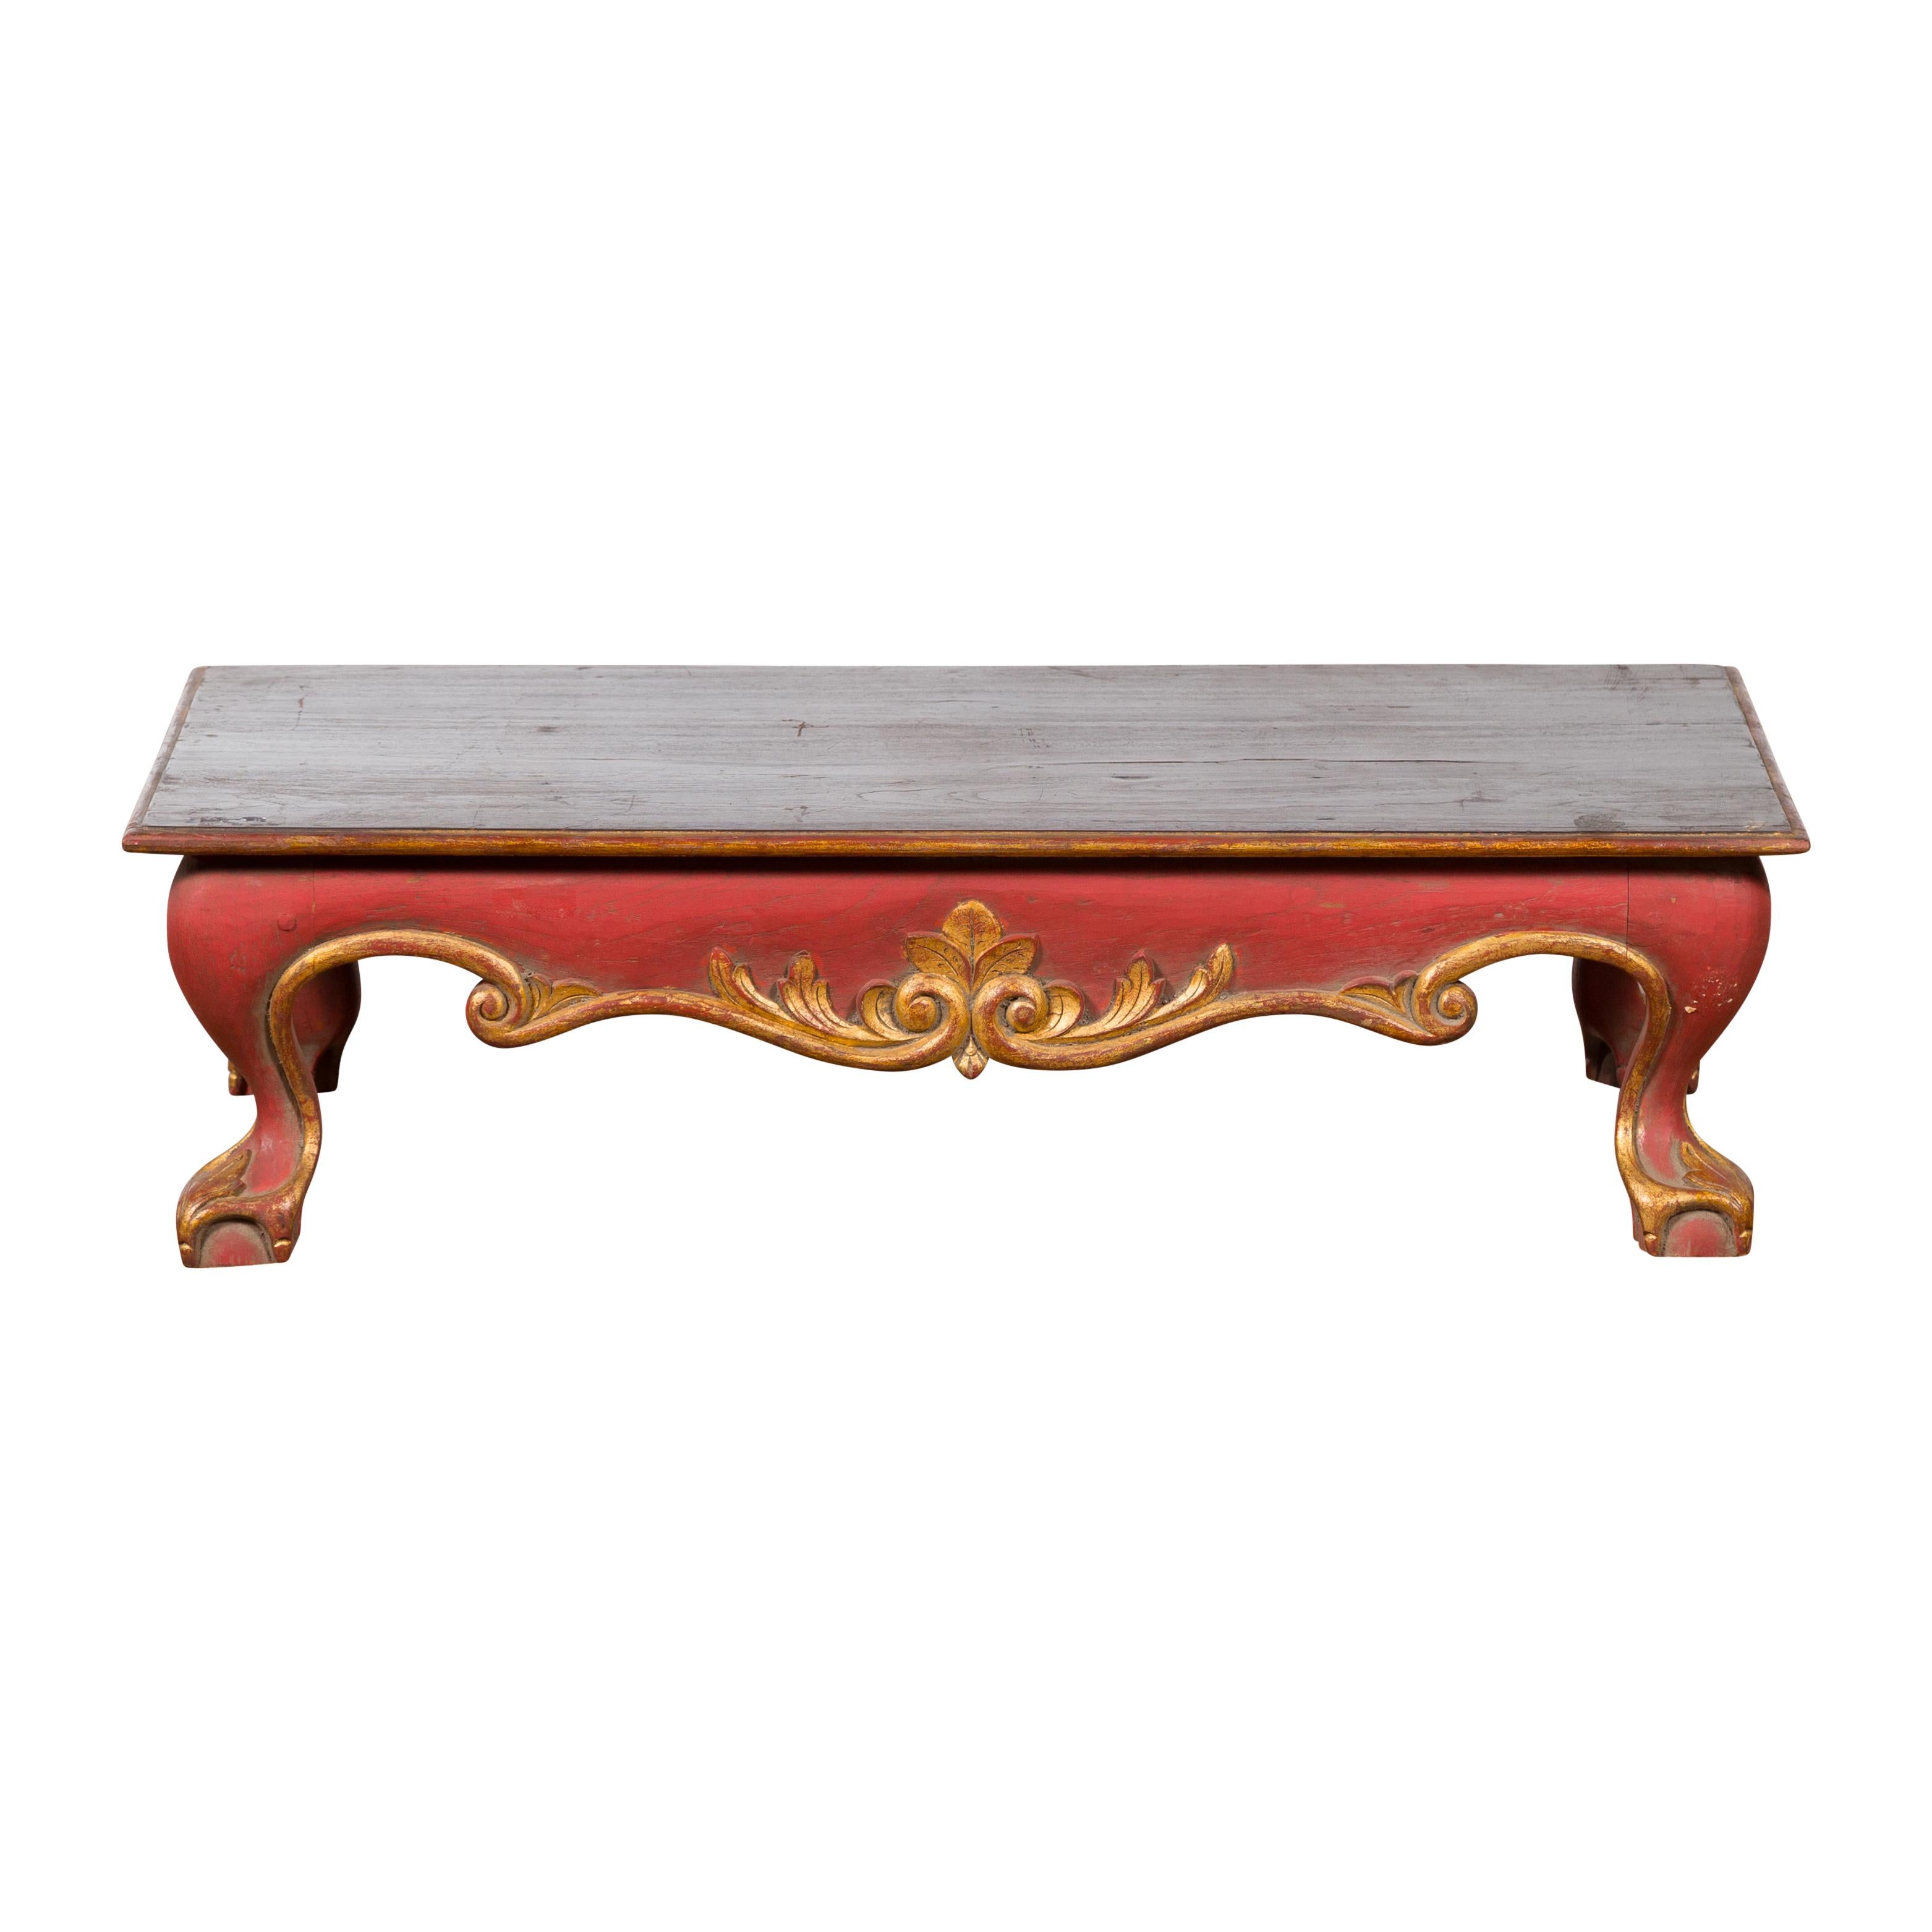 A vintage Indonesian low coffee table from the mid 20th century, with hand-carved apron, gilt accents and ball-and-claw feet. Created in Indonesia during the midcentury period, this coffee table captures our attention with its Rococo style lines as